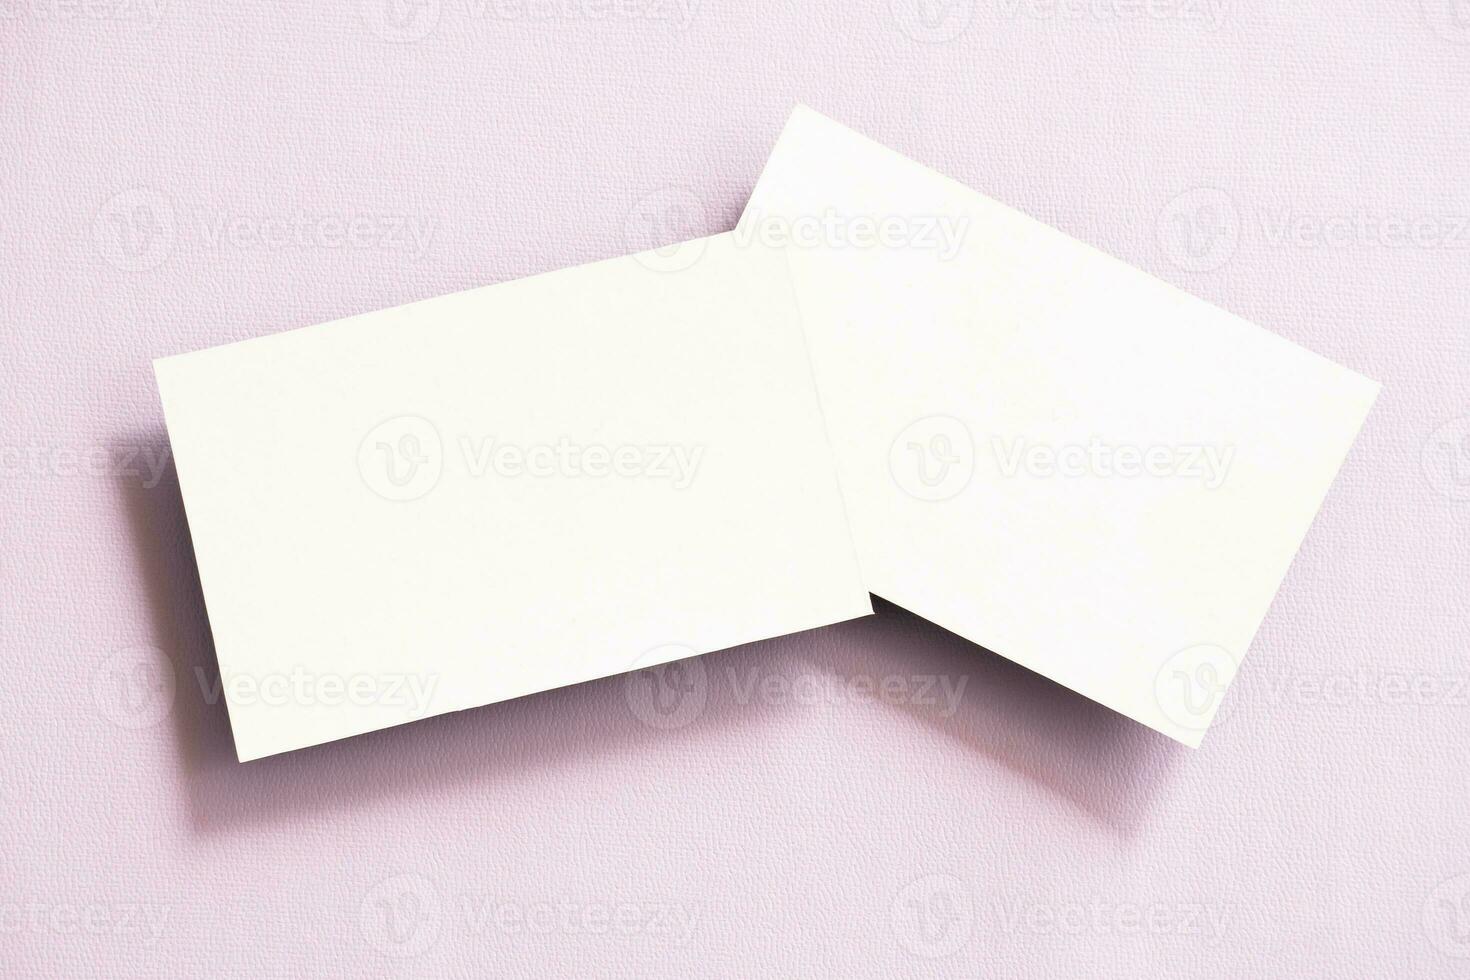 Two blank business card mockup photo